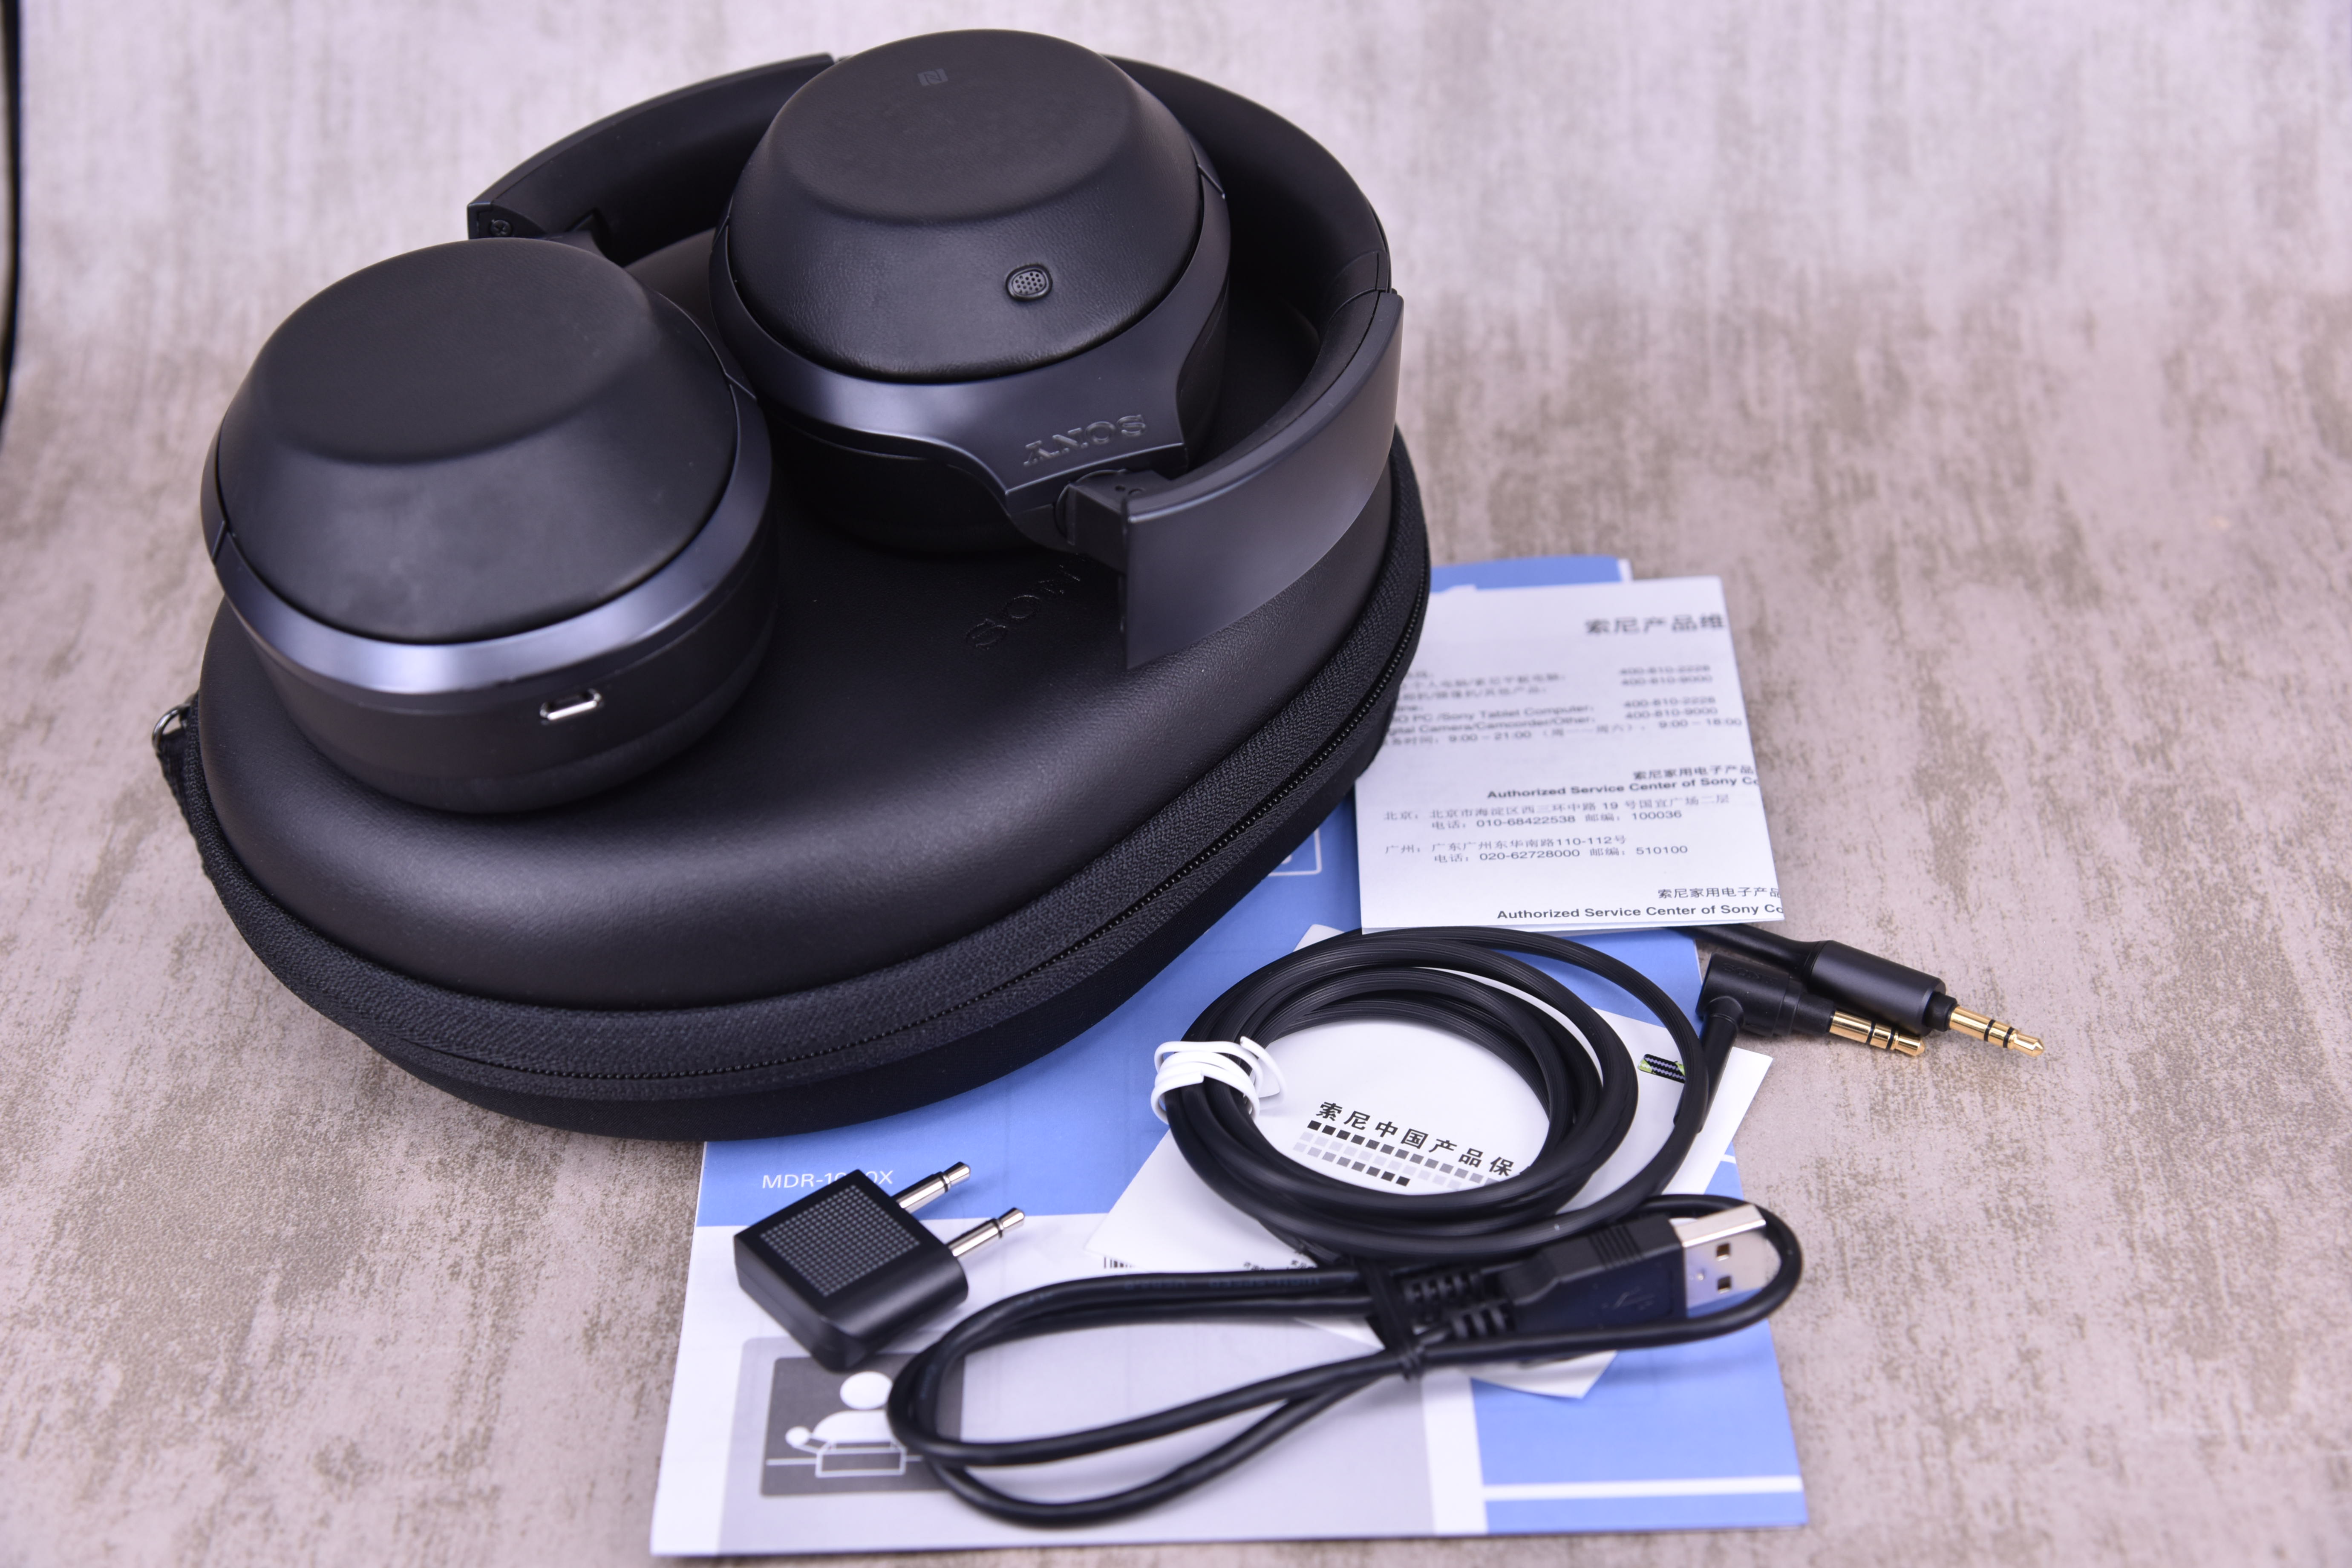 243 10 Sony Sony Mdr 1000x Wh 1000xm2 1000xm3 Headset With Wireless Bluetooth Noise Reduction From Best Taobao Agent Taobao International International Ecommerce Newbecca Com